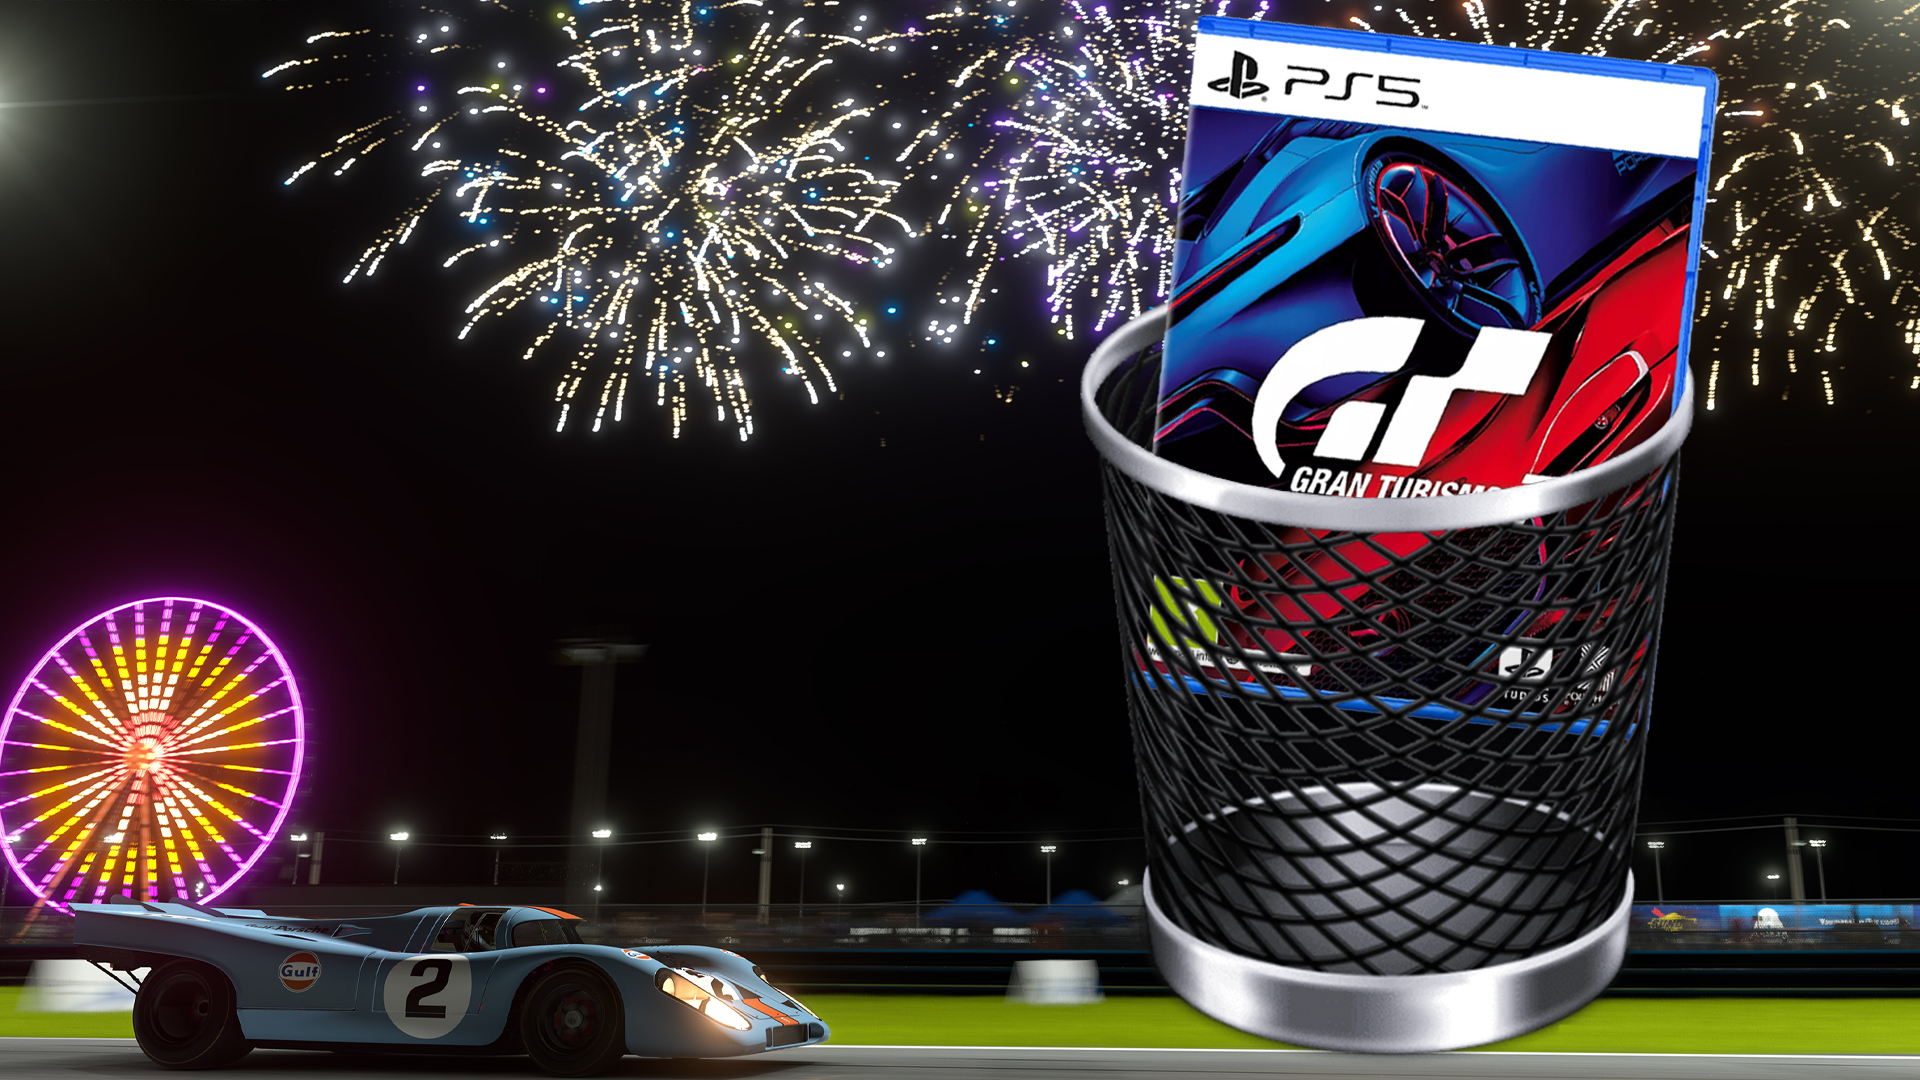 Gran Turismo 7 Is Officially Sony's Worst-Rated Game Ever